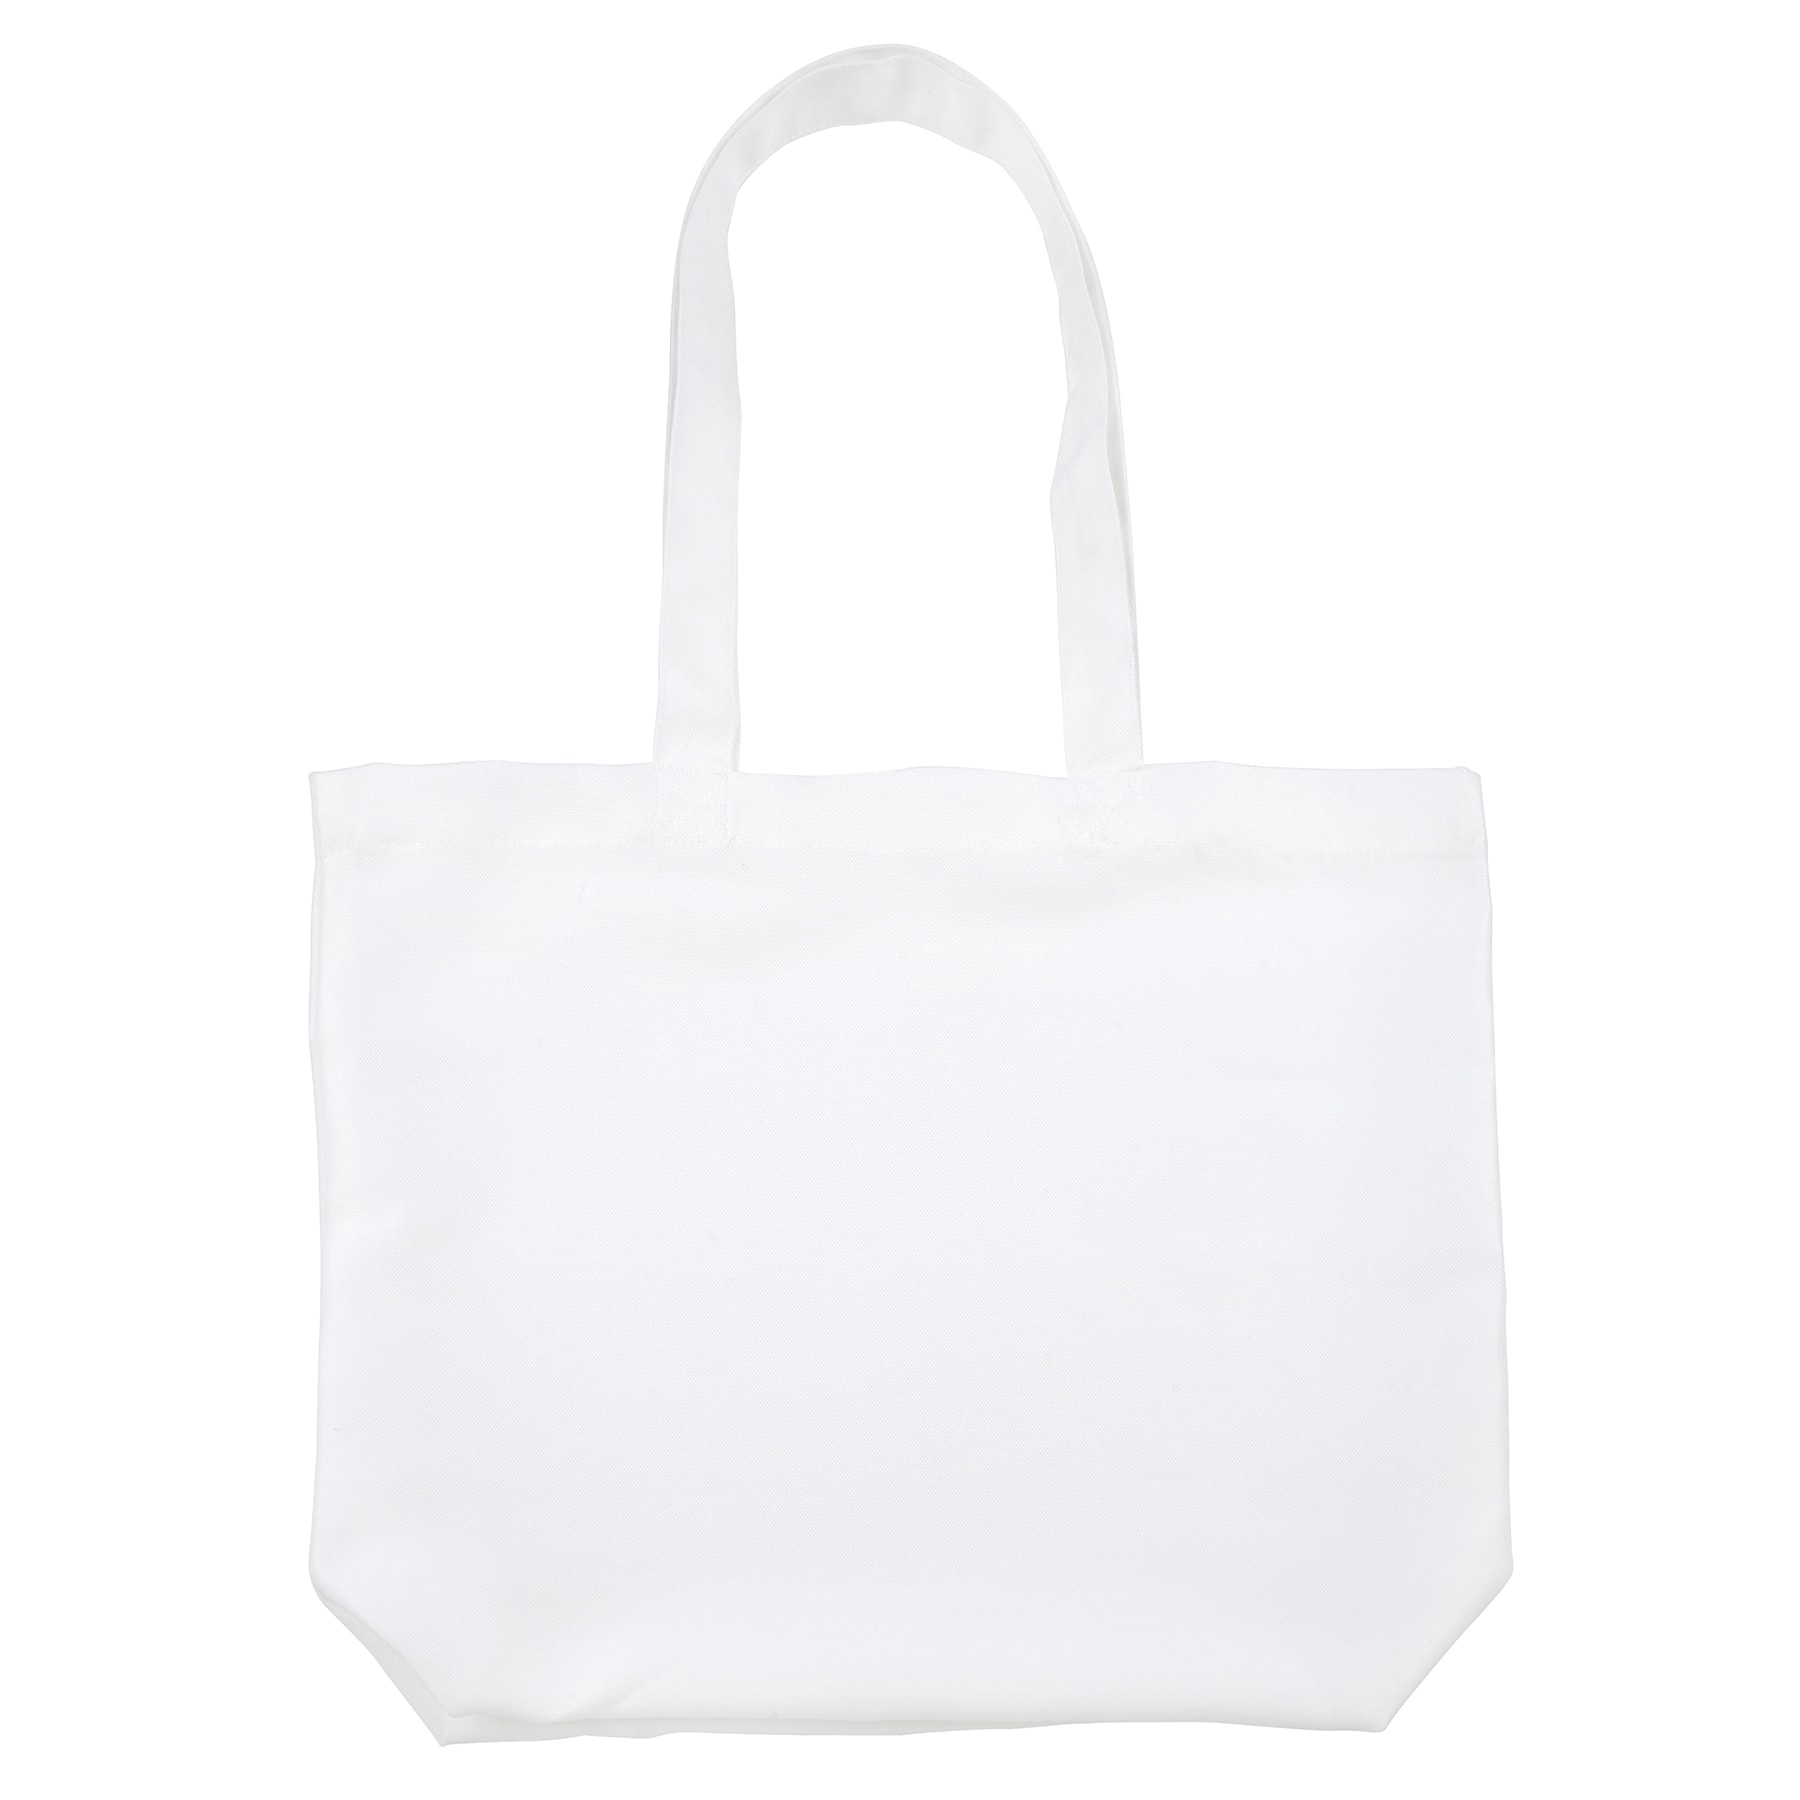 Bags & Totes, Apparel & Wearables, Sublimation Blanks